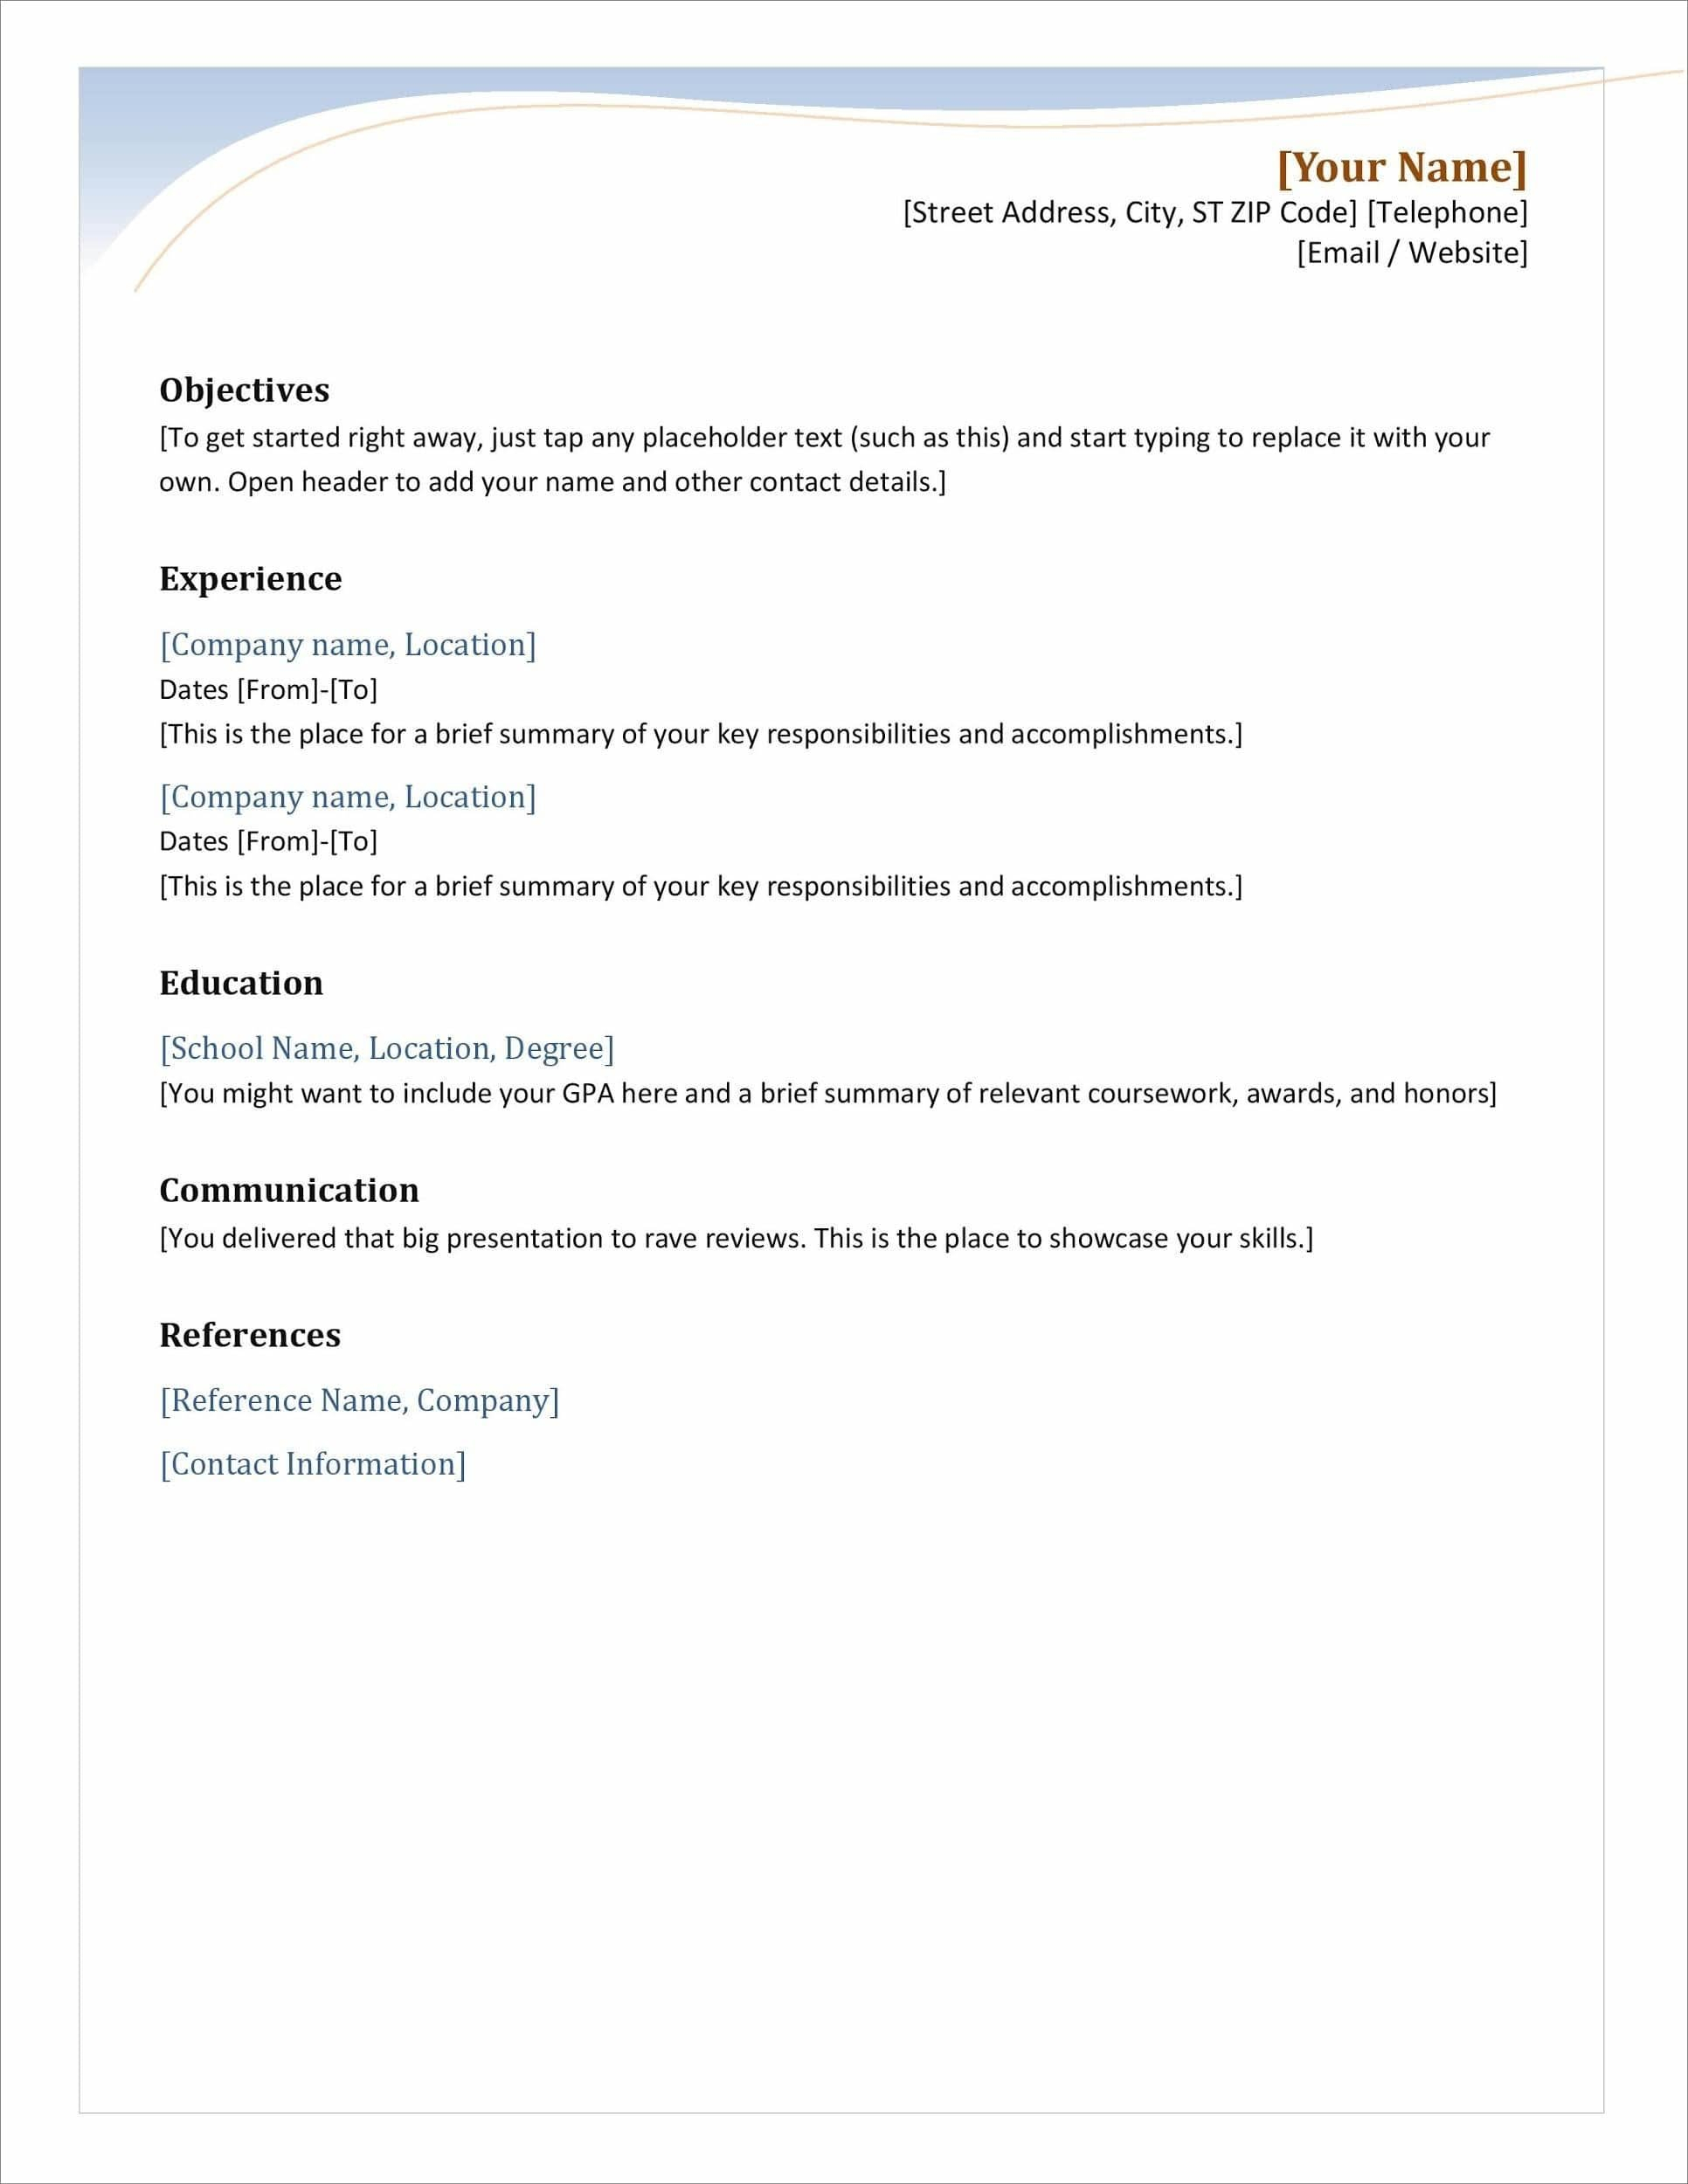 25 Resume Templates For Microsoft Word [Free Download] With Regard To Simple Resume Template Microsoft Word